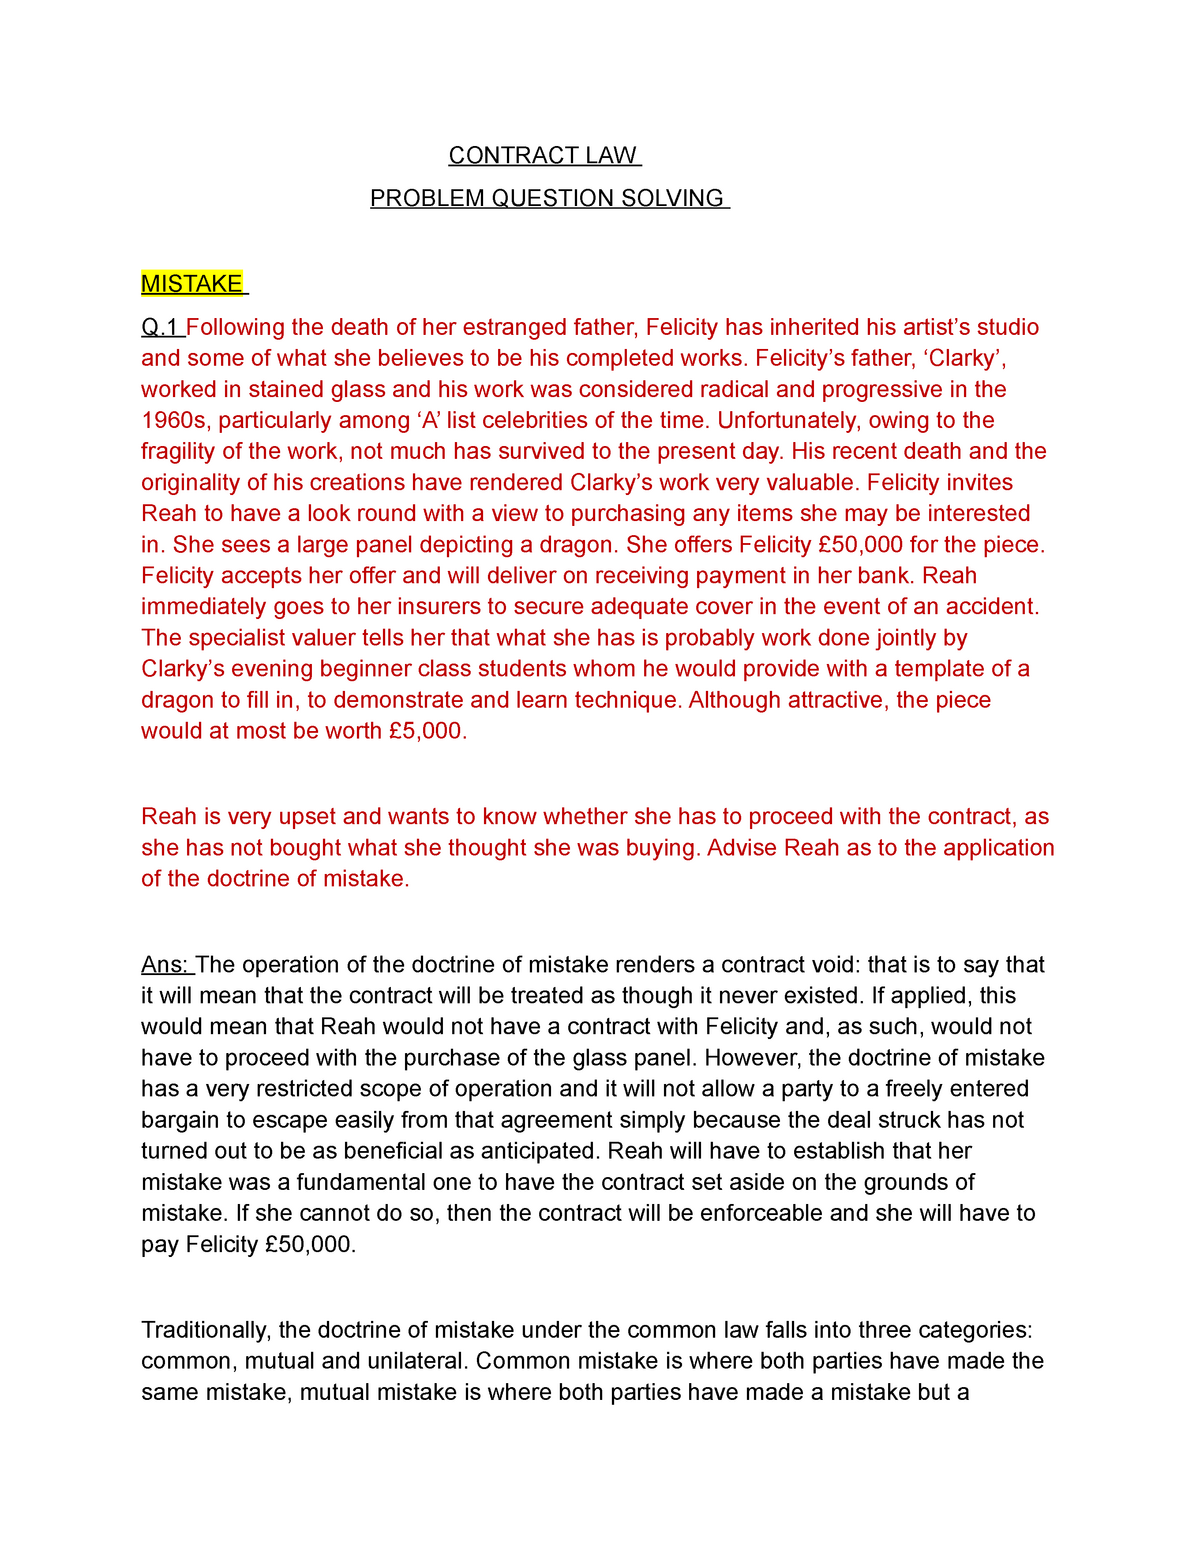 unilateral mistake contract law essay